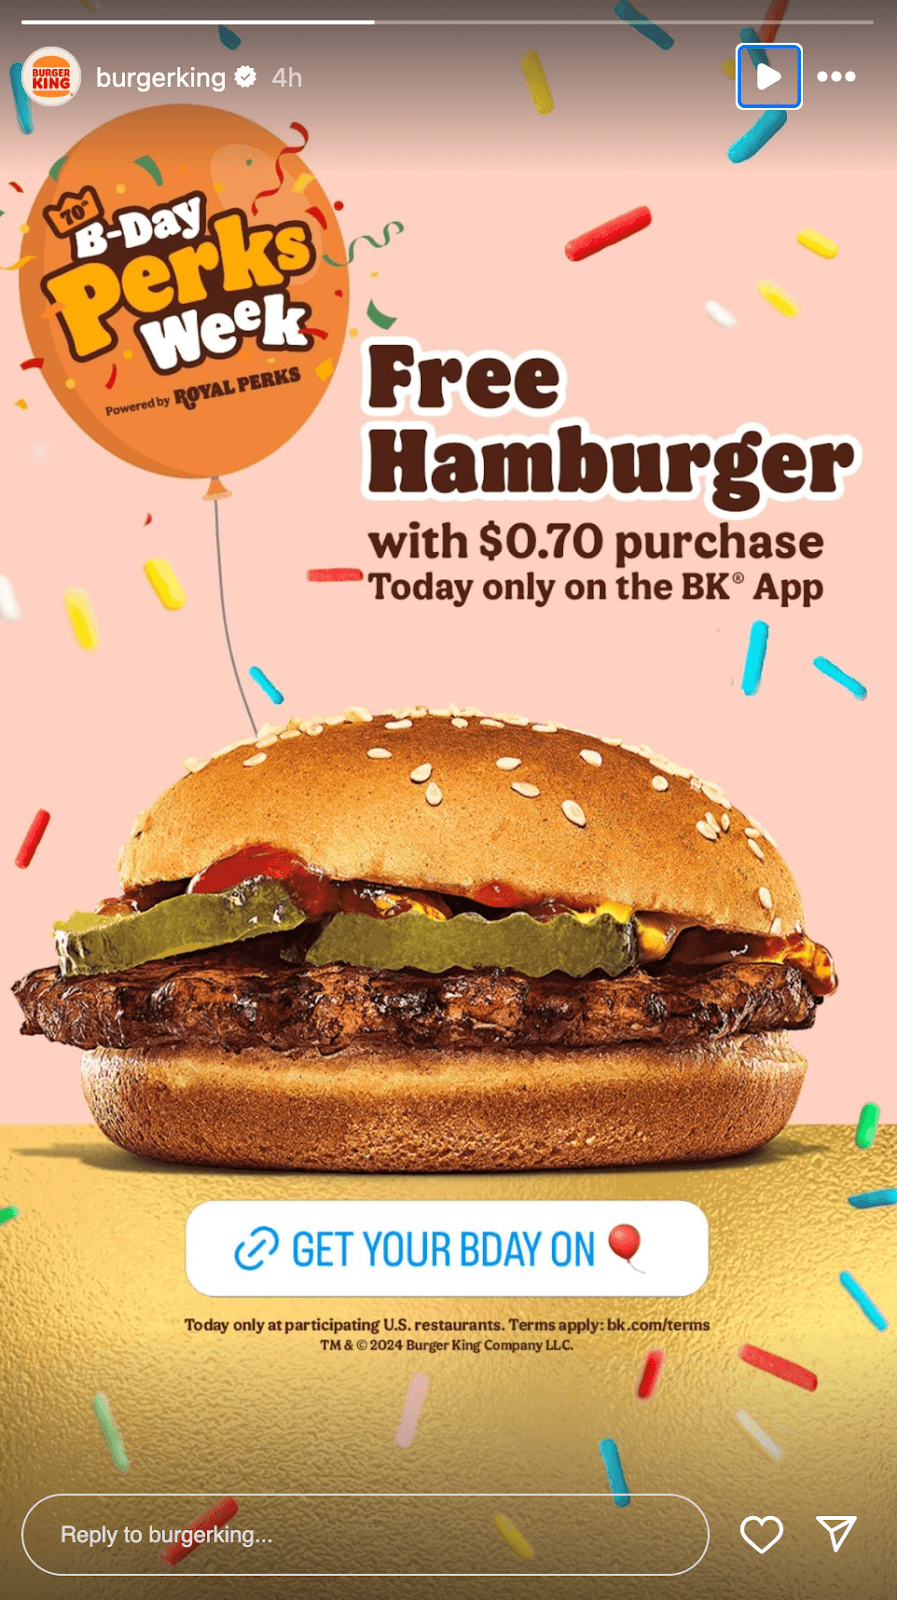 Sharing current deals and promotions from Burger King